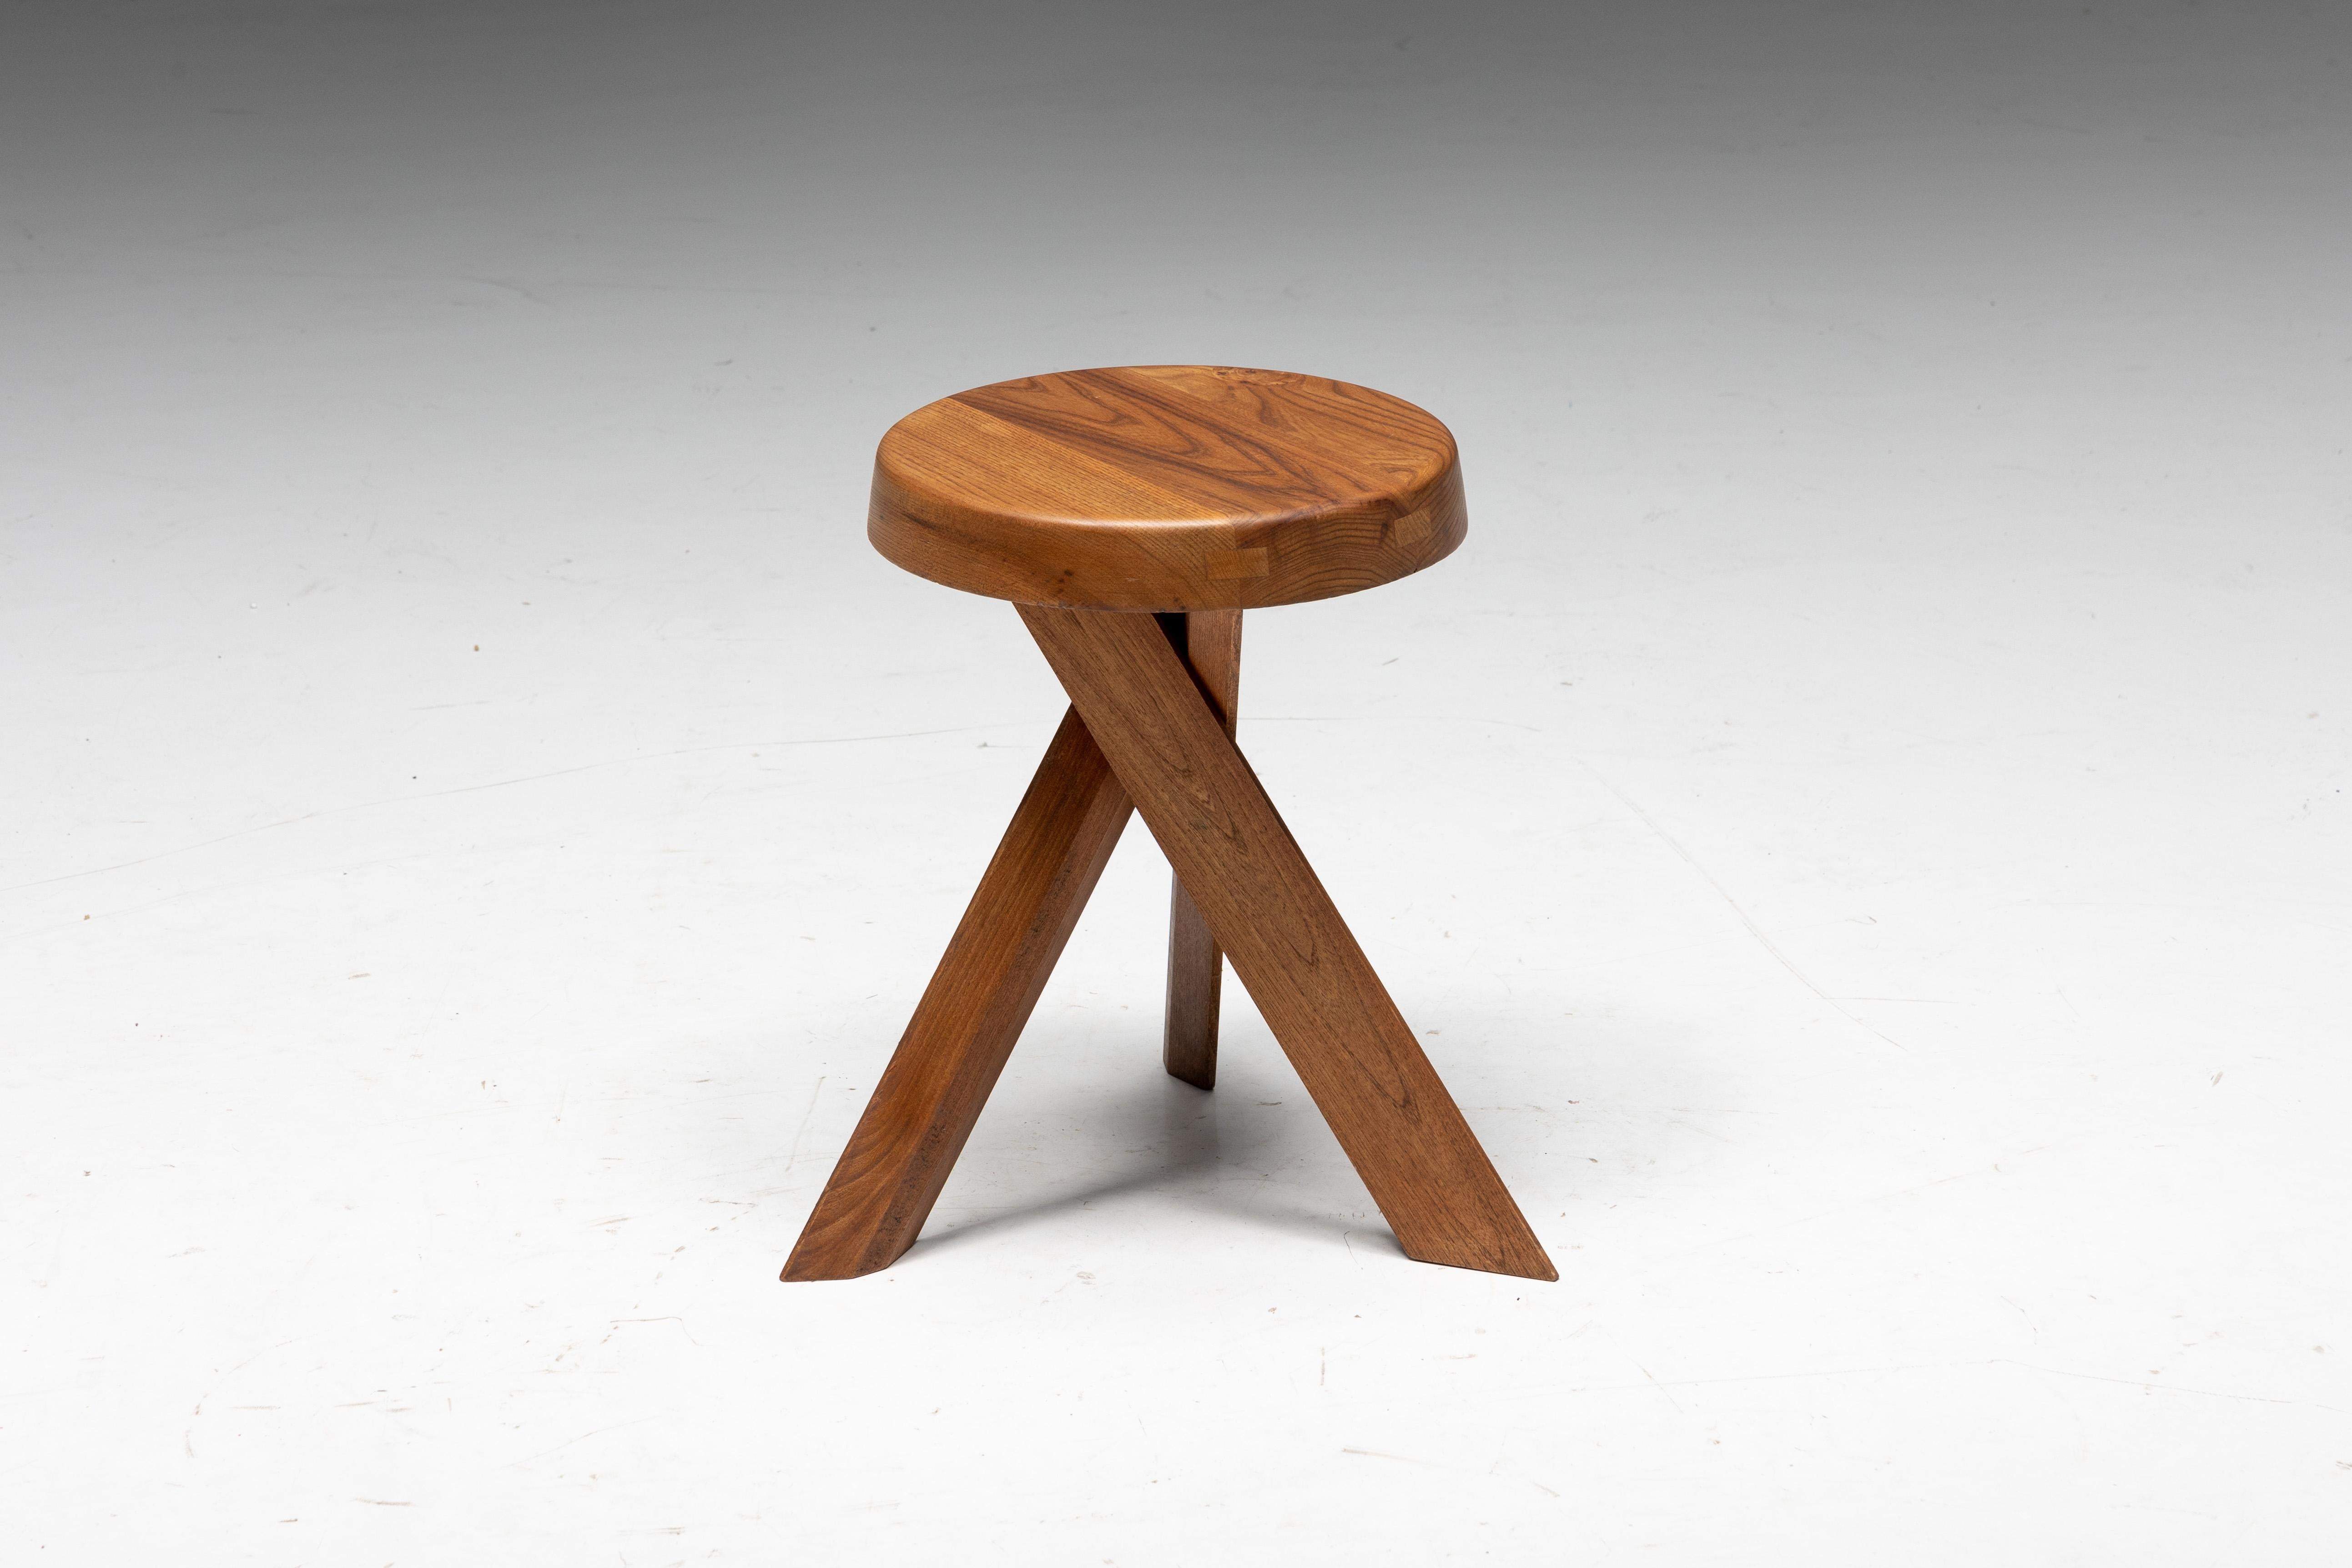 Early edition stools by Pierre Chapo, meticulously crafted from solid elm wood in 1970s France, feature a thick seating with natural veining and three crossed feet. Visible joints along the seating's edge are typical of Pierre Chapo's creations. The